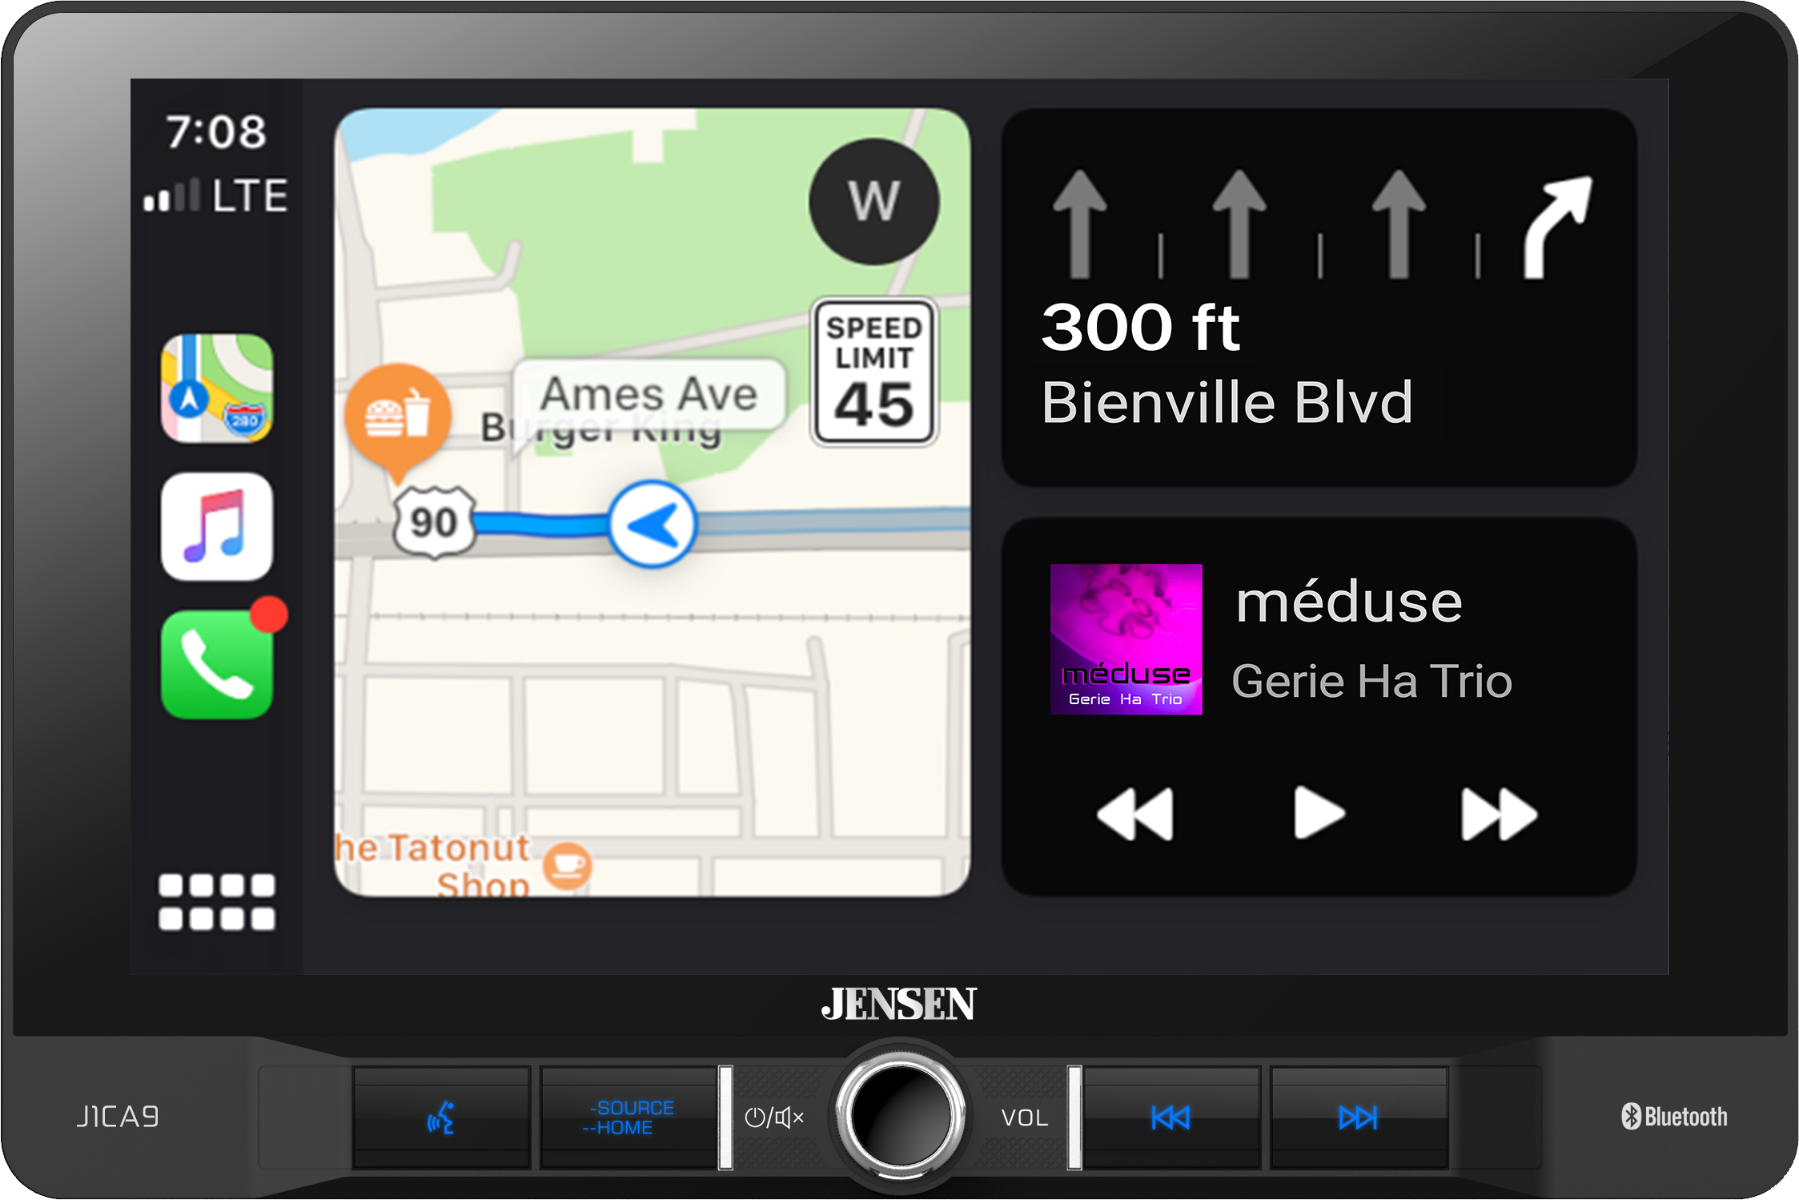 9 Media Receiver with Apple CarPlay and Android Auto - J1CA9 - Jensen  Mobile